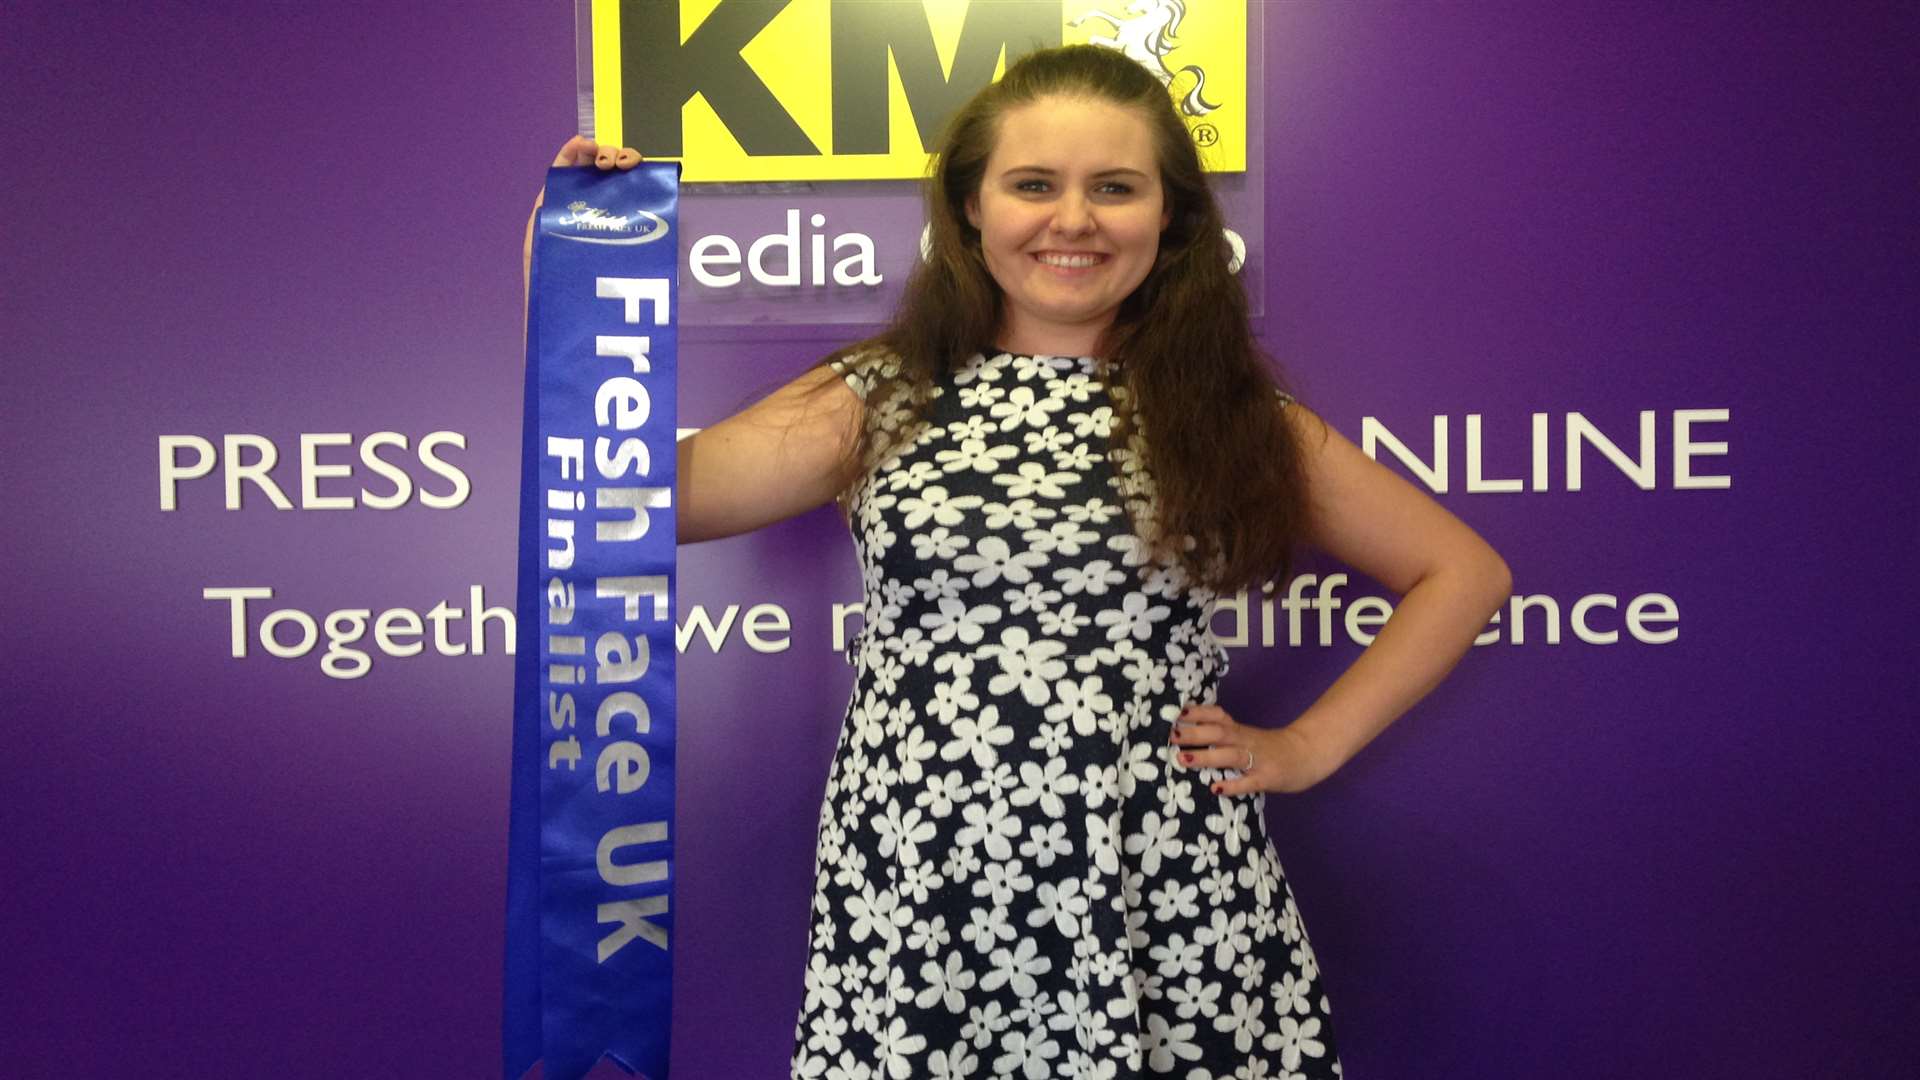 Kristina Webb from Sheerness who is taking part in in national beauty pageant.